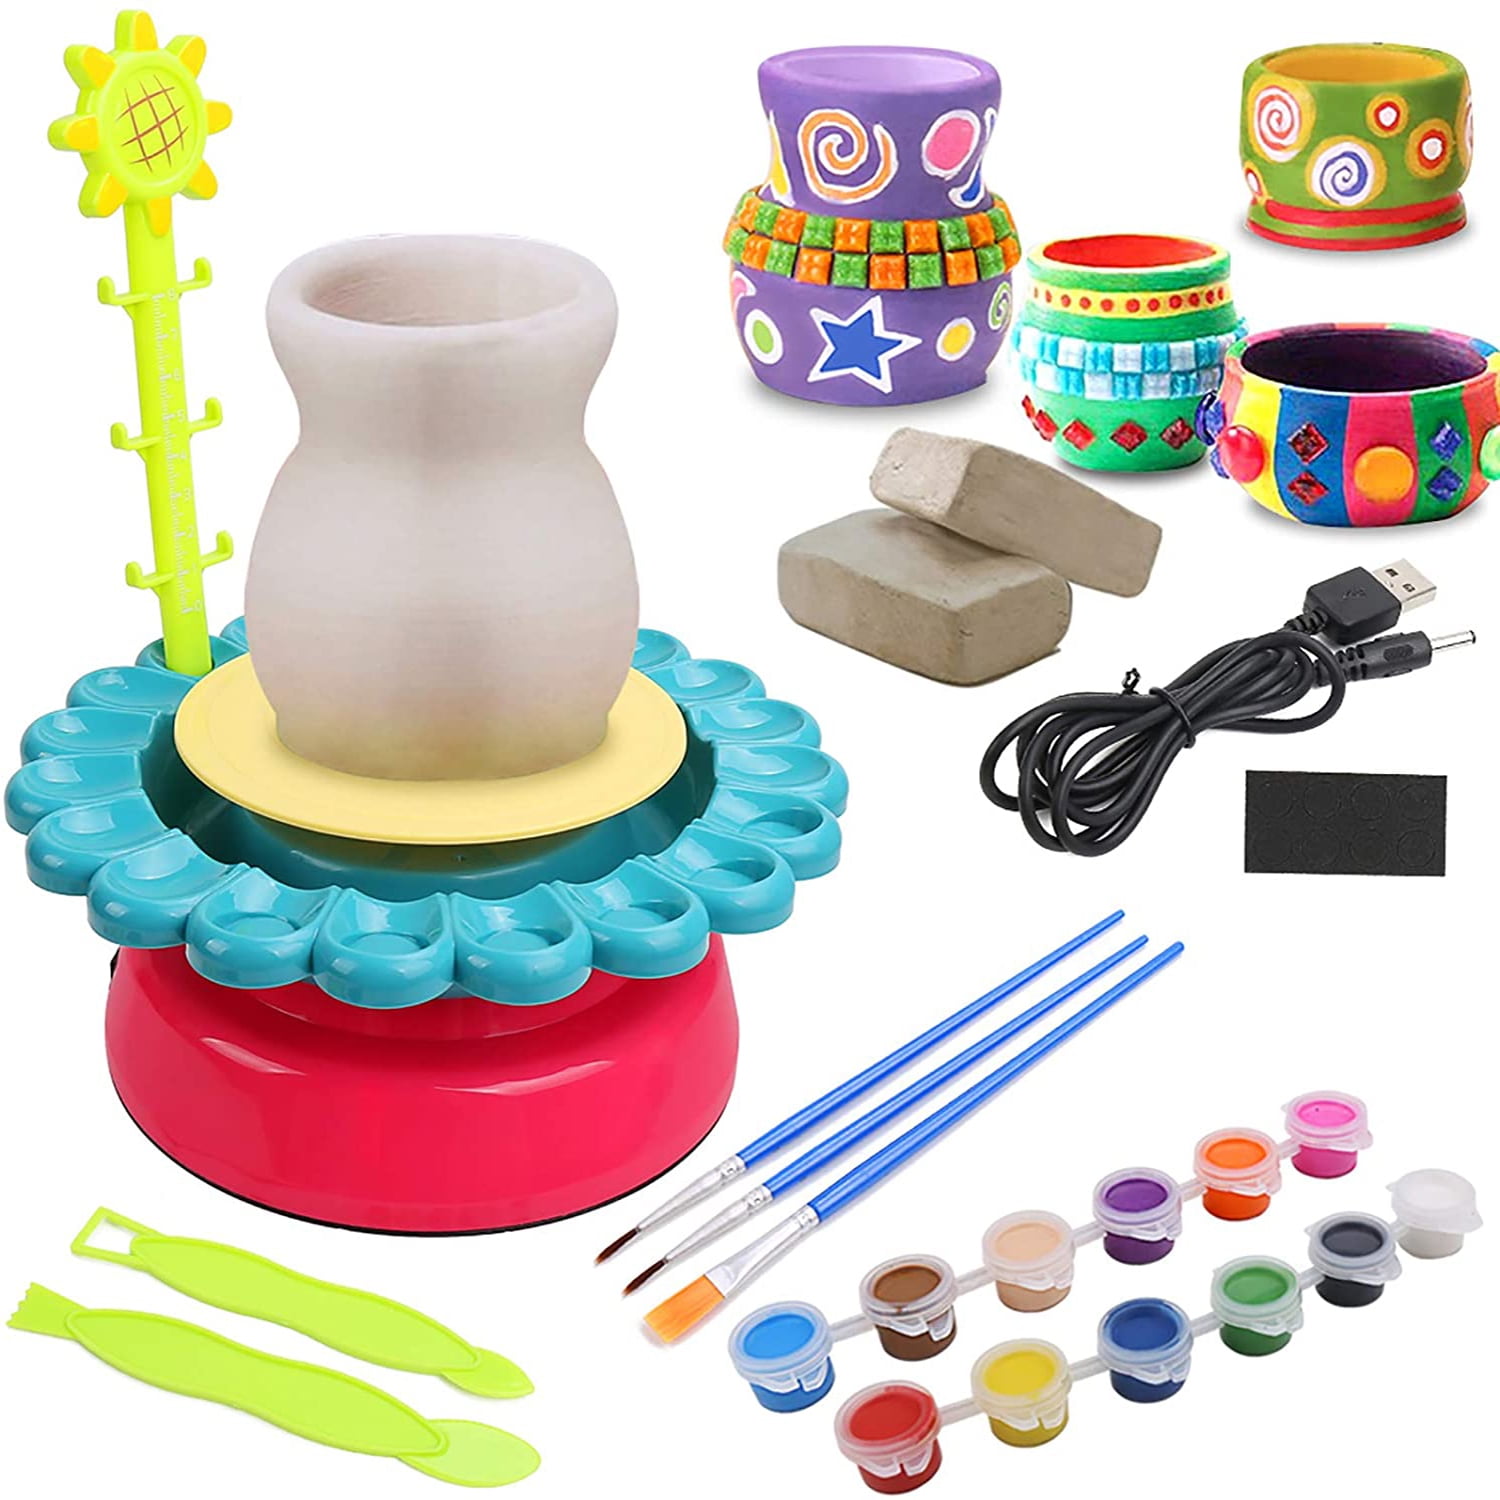 Pottery Wheel Art Craft Kit, Pottery Studio Polymer Air Dry Modeling Clay Tools, Craft Paint Palette Set USB Powered, Schools & Home Educational Toy